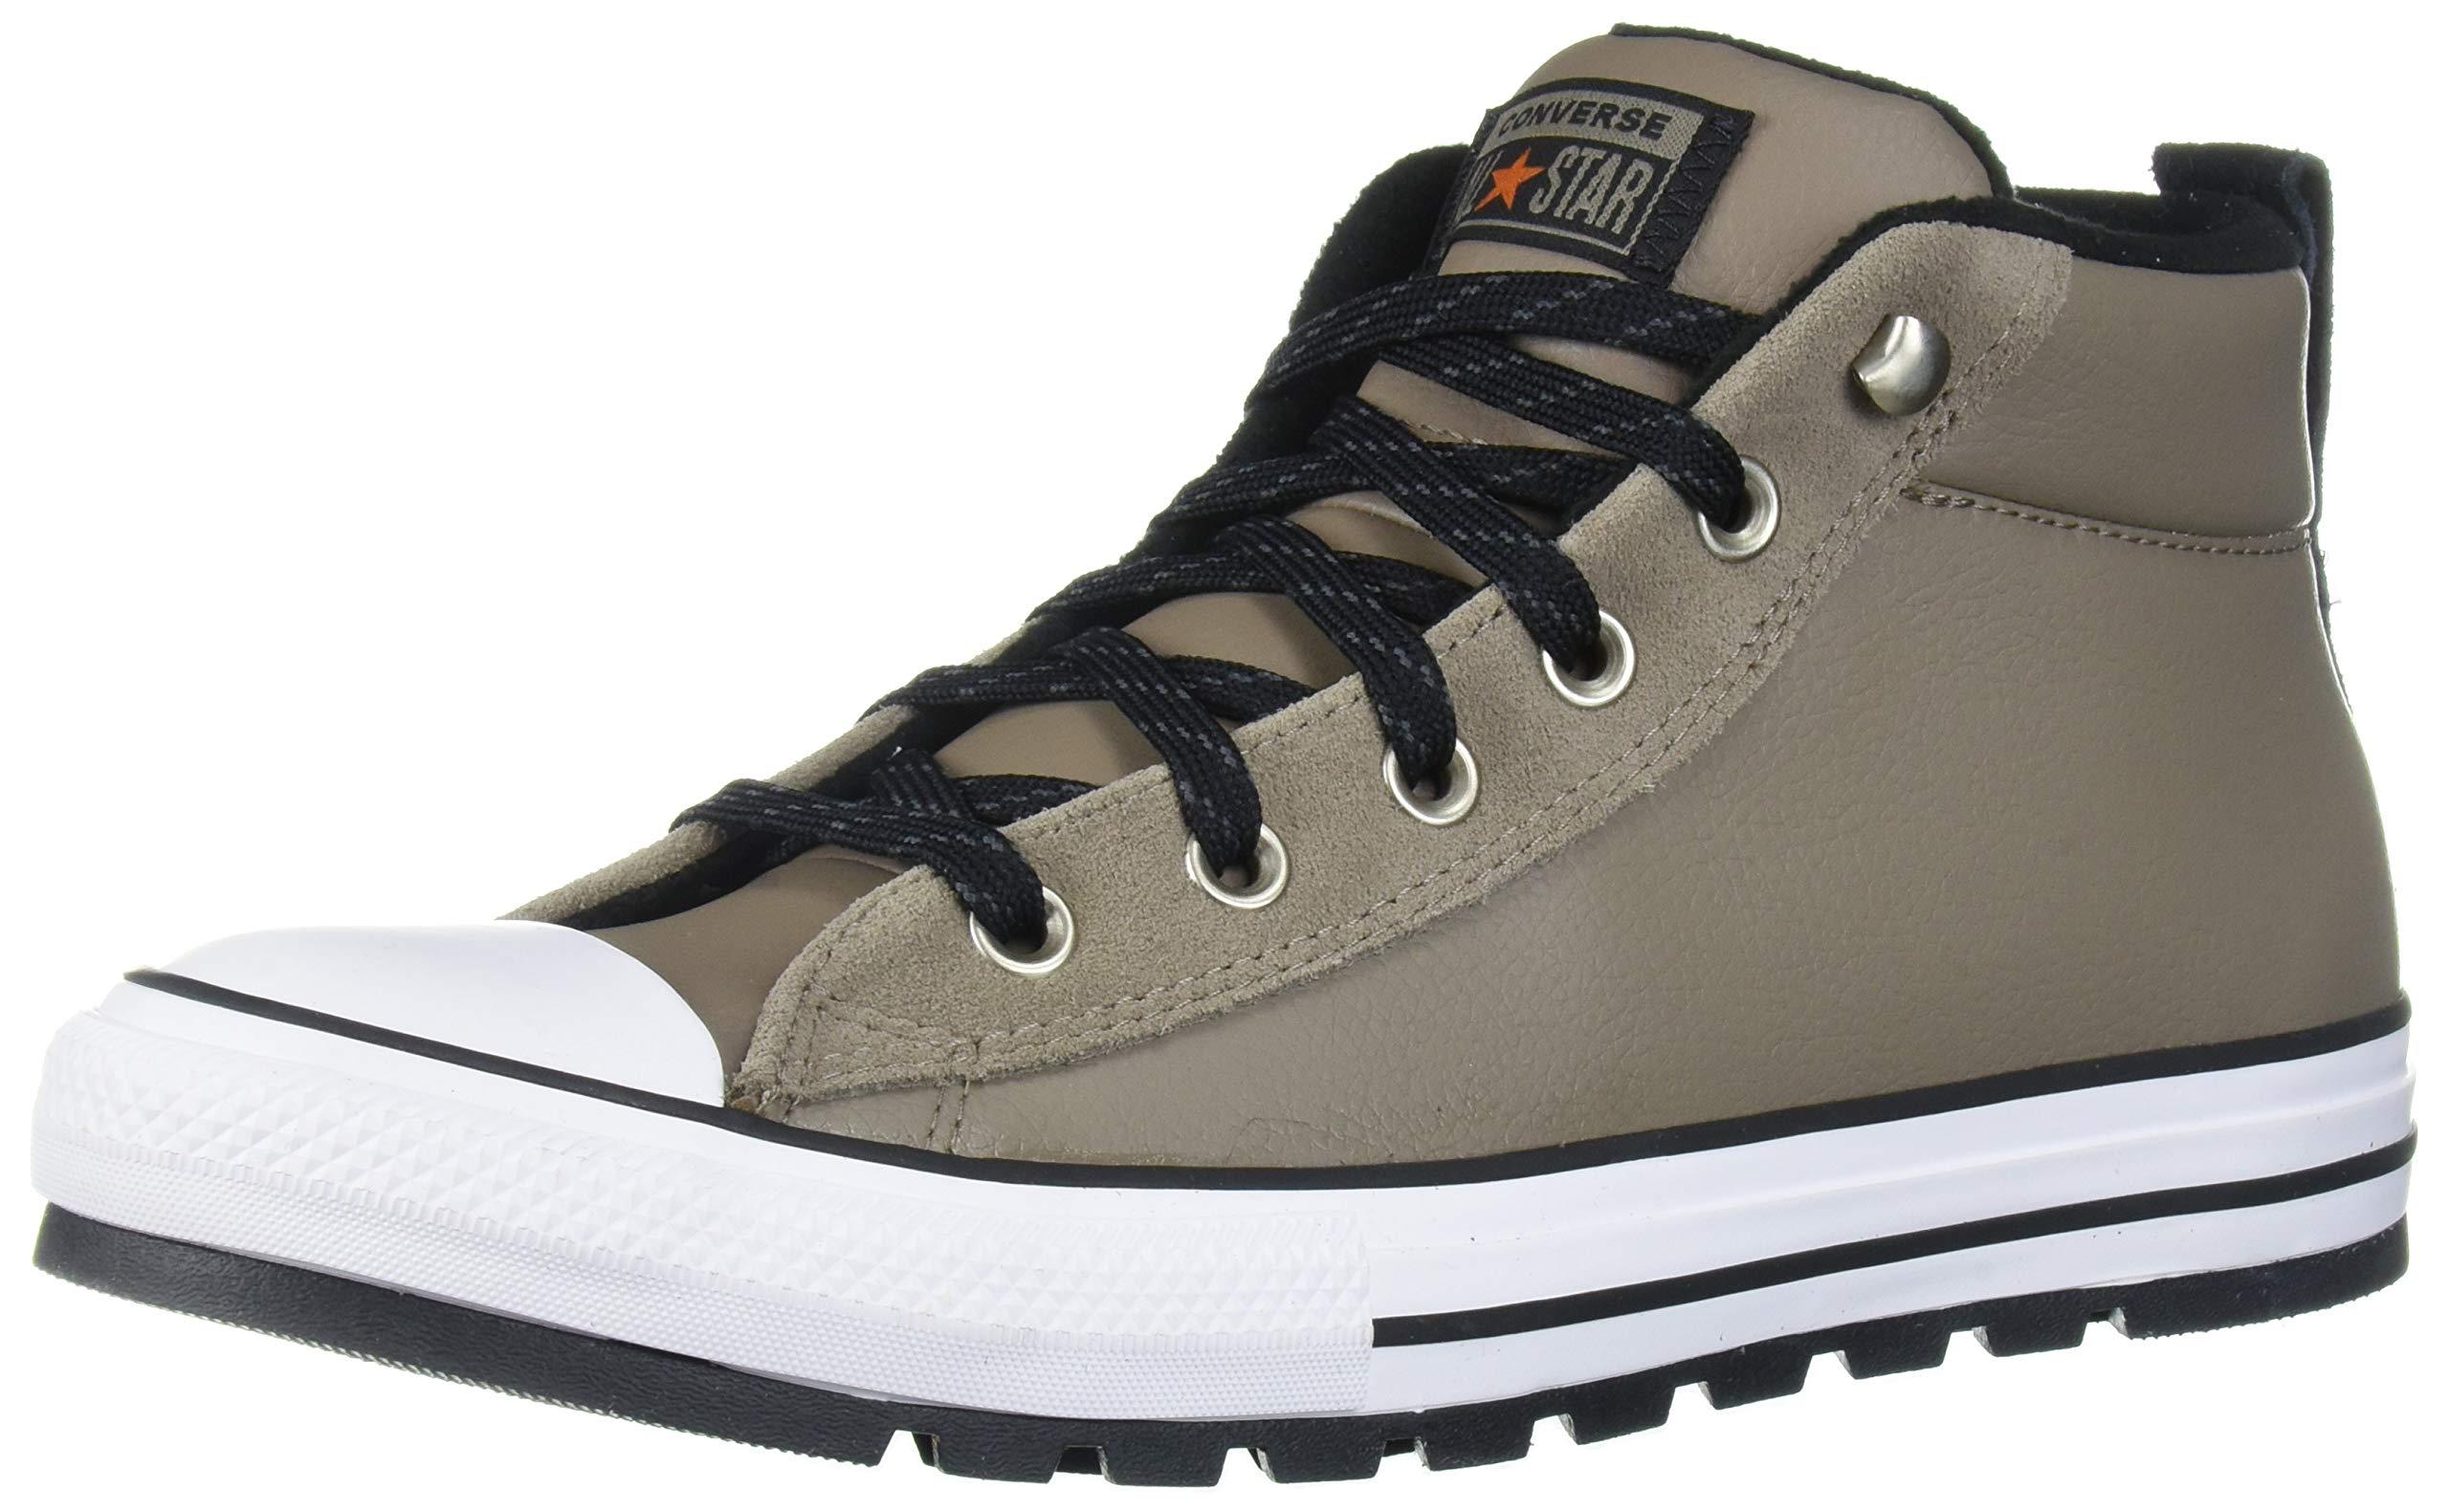 Chuck Taylor All Star High Street Leather Sneaker | lupon.gov.ph